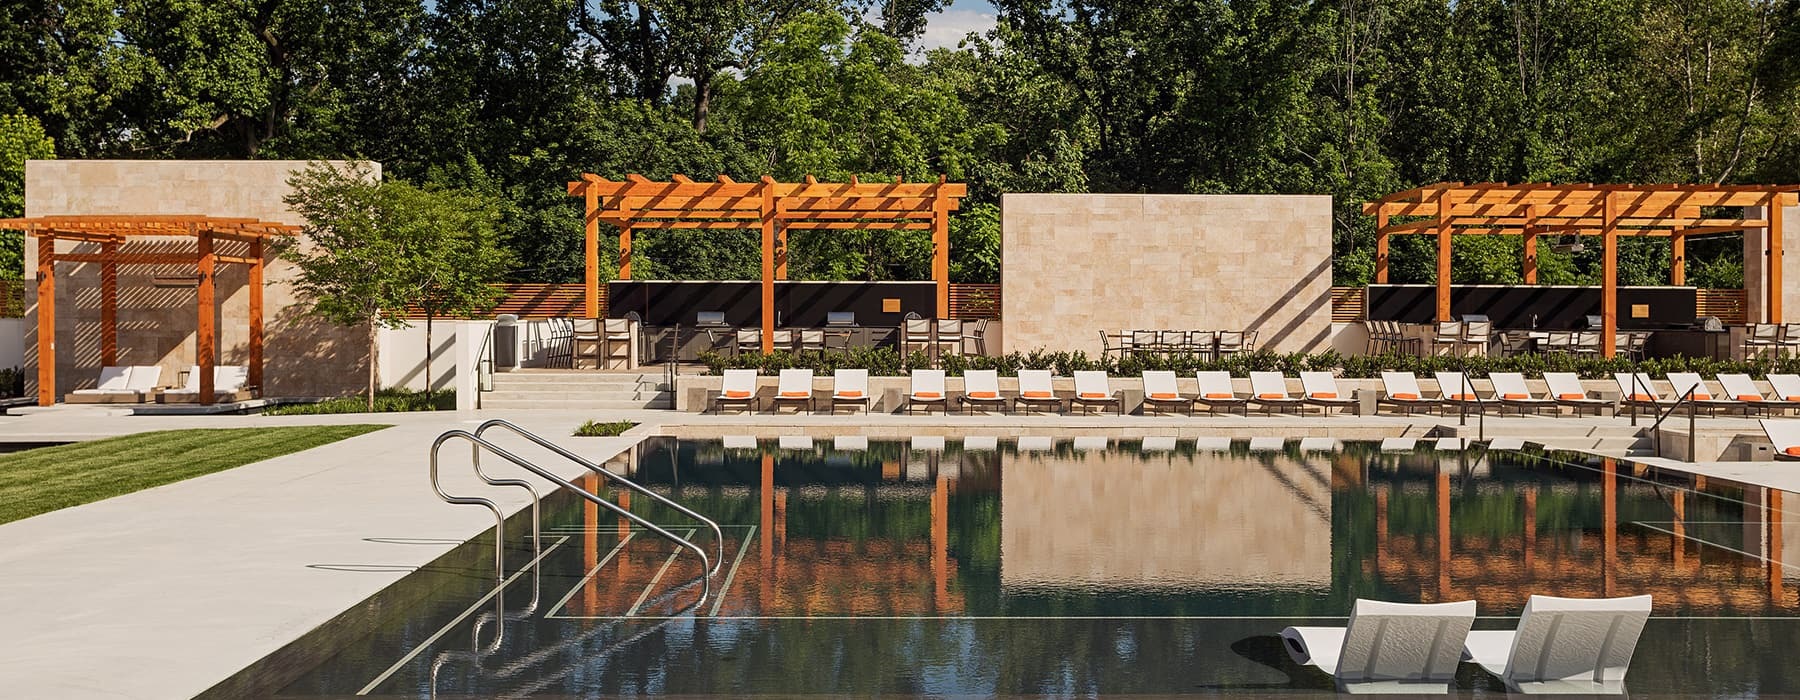 view of pool showing ample reclining-style seating and surrounding lush landscaping